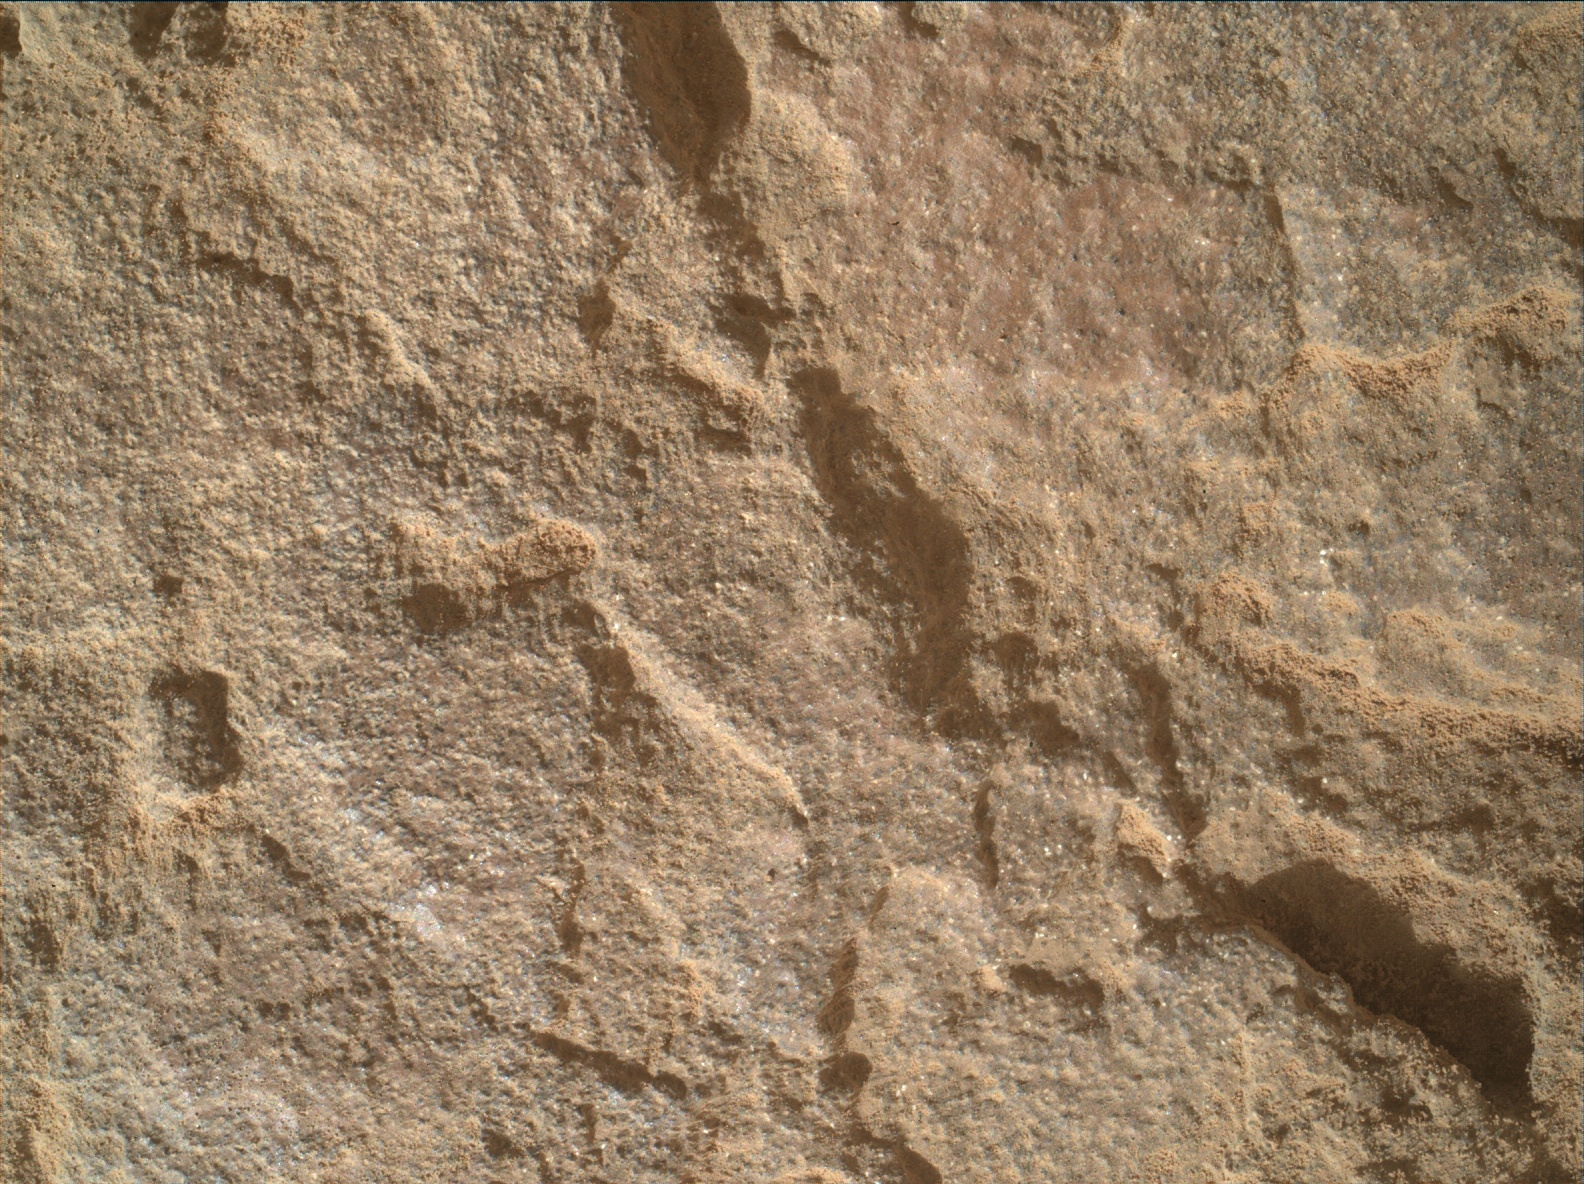 Nasa's Mars rover Curiosity acquired this image using its Mars Hand Lens Imager (MAHLI) on Sol 1711